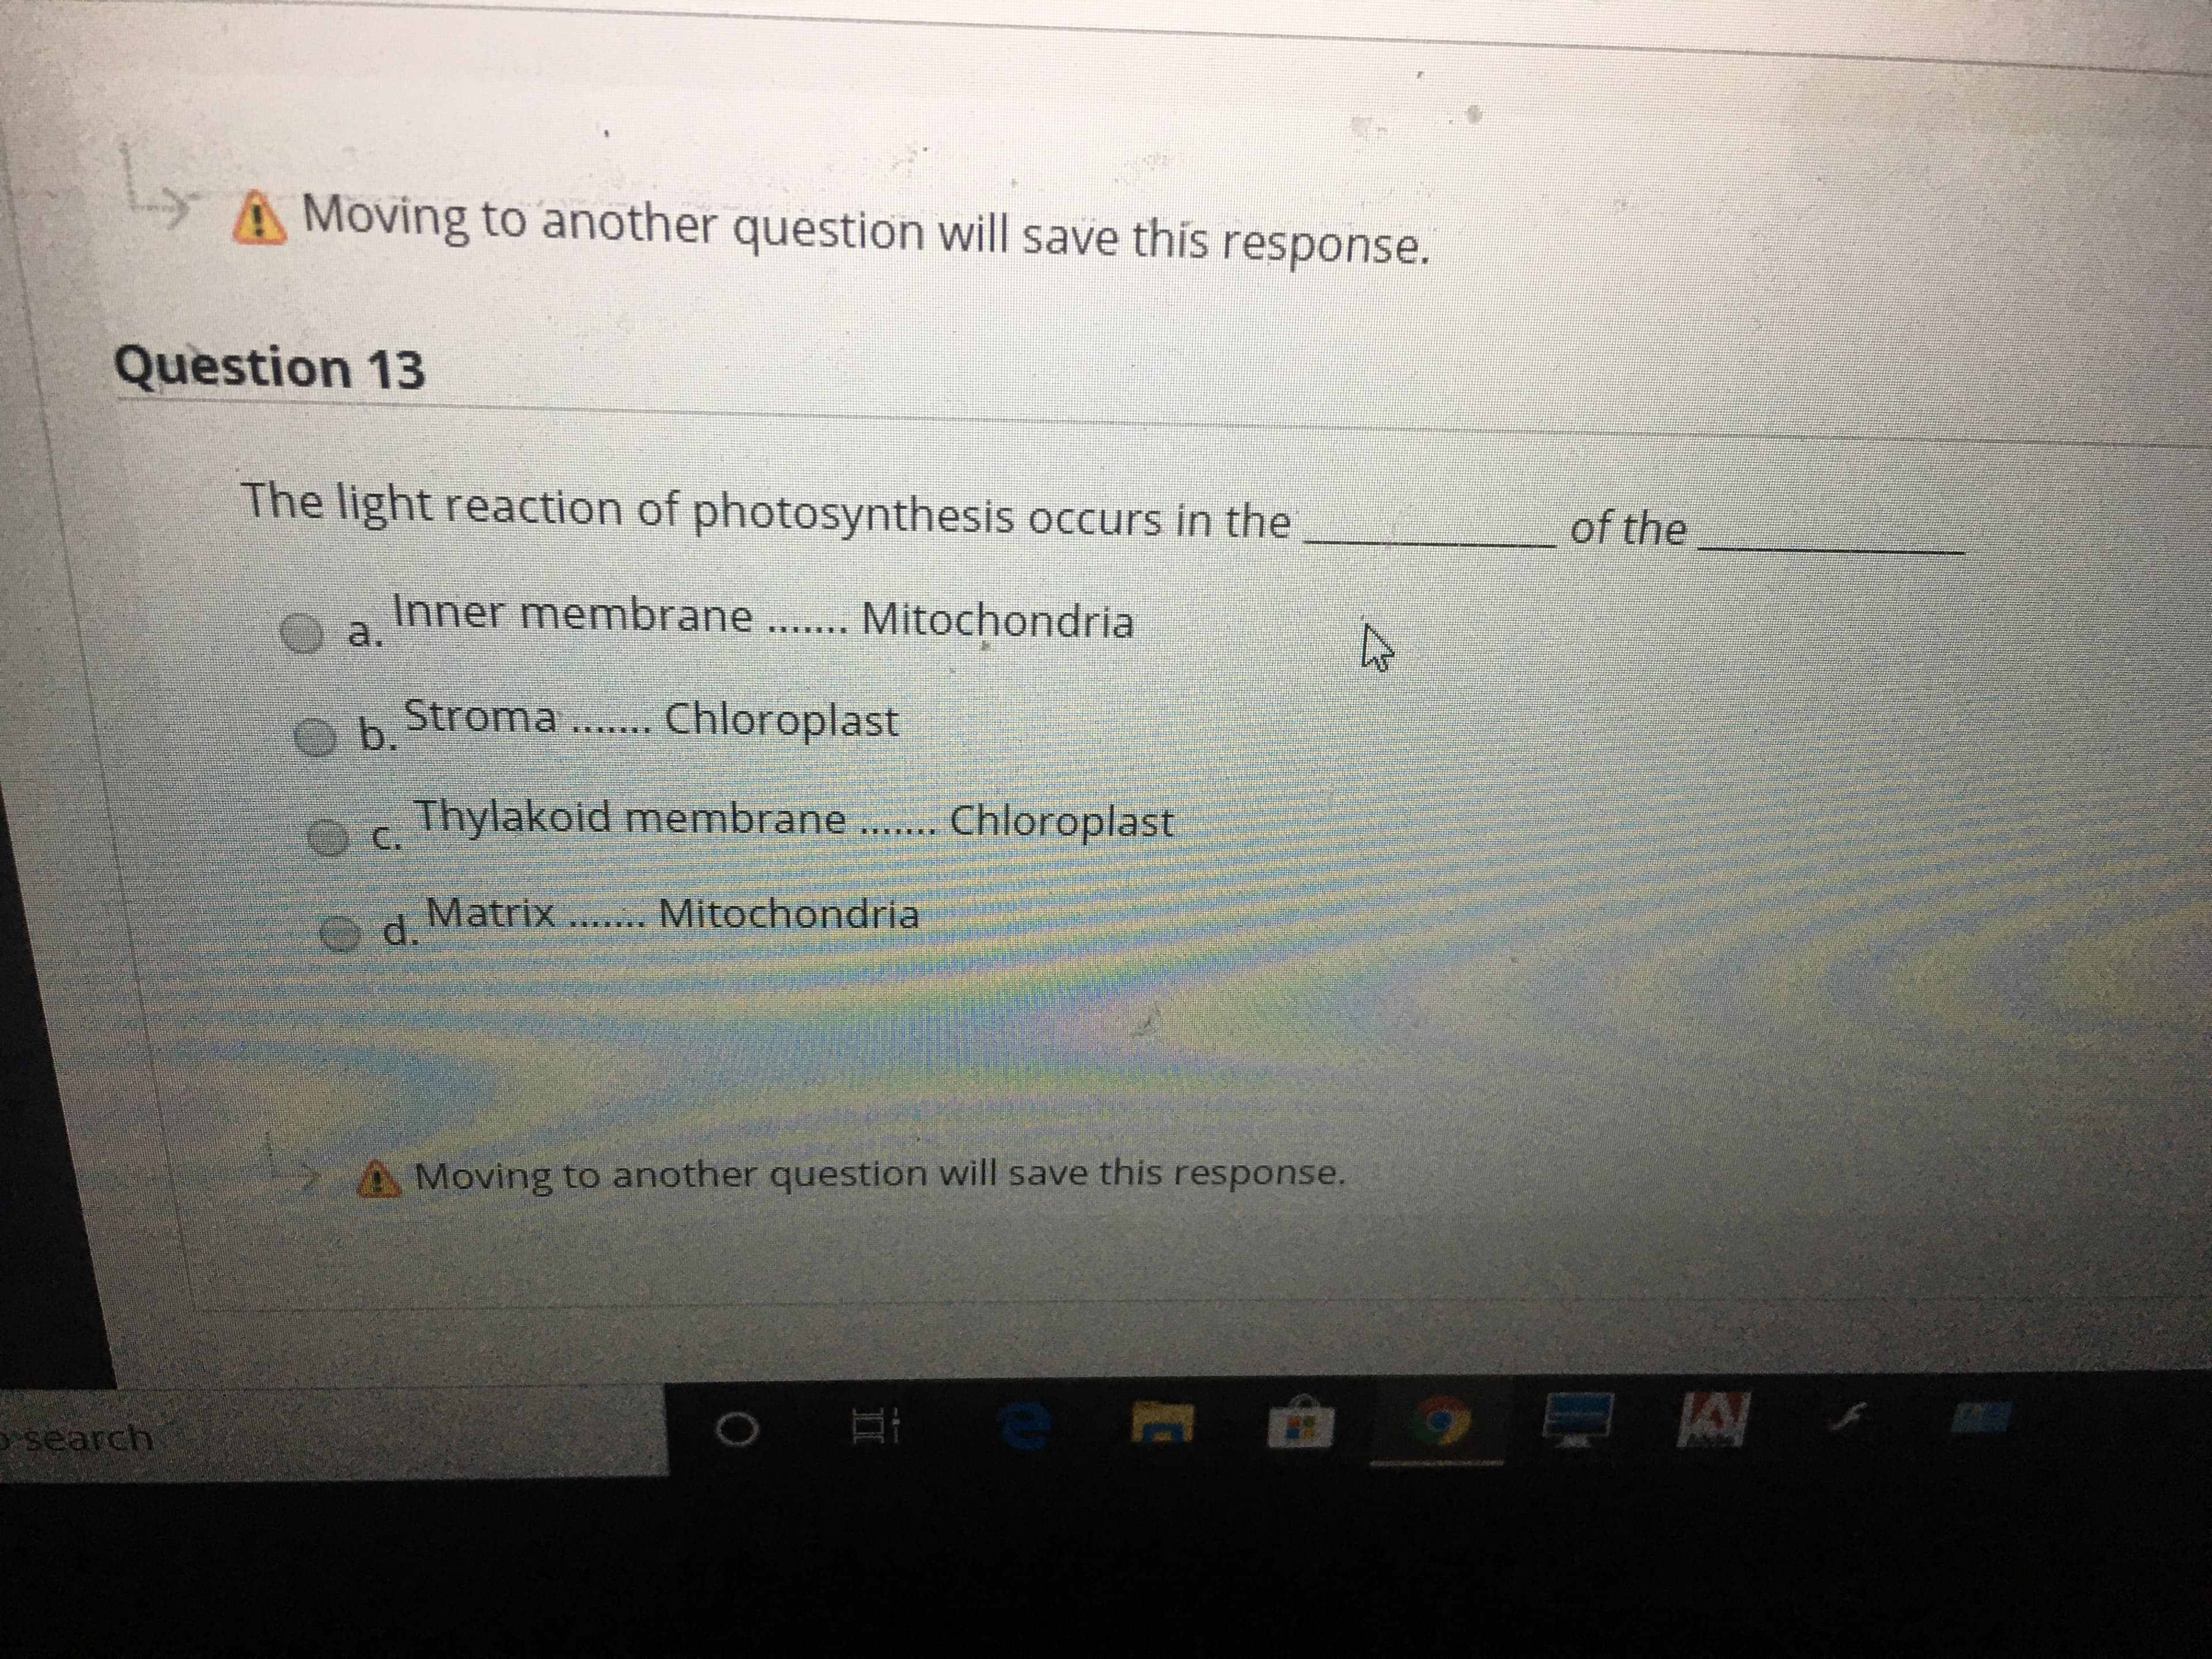 A Moving to another question will save this response.
Question 13
The light reaction of photosynthesis occurs in the
of the
Inner membrane ....... Mitochondria
O a.
Stroma ... Chloroplast
Ob.
Thylakoid membrane.. Chloroplast
అి C.
O d.
Matrix ... Mitochondria
Moving to another question will save this response.
osearch
II
